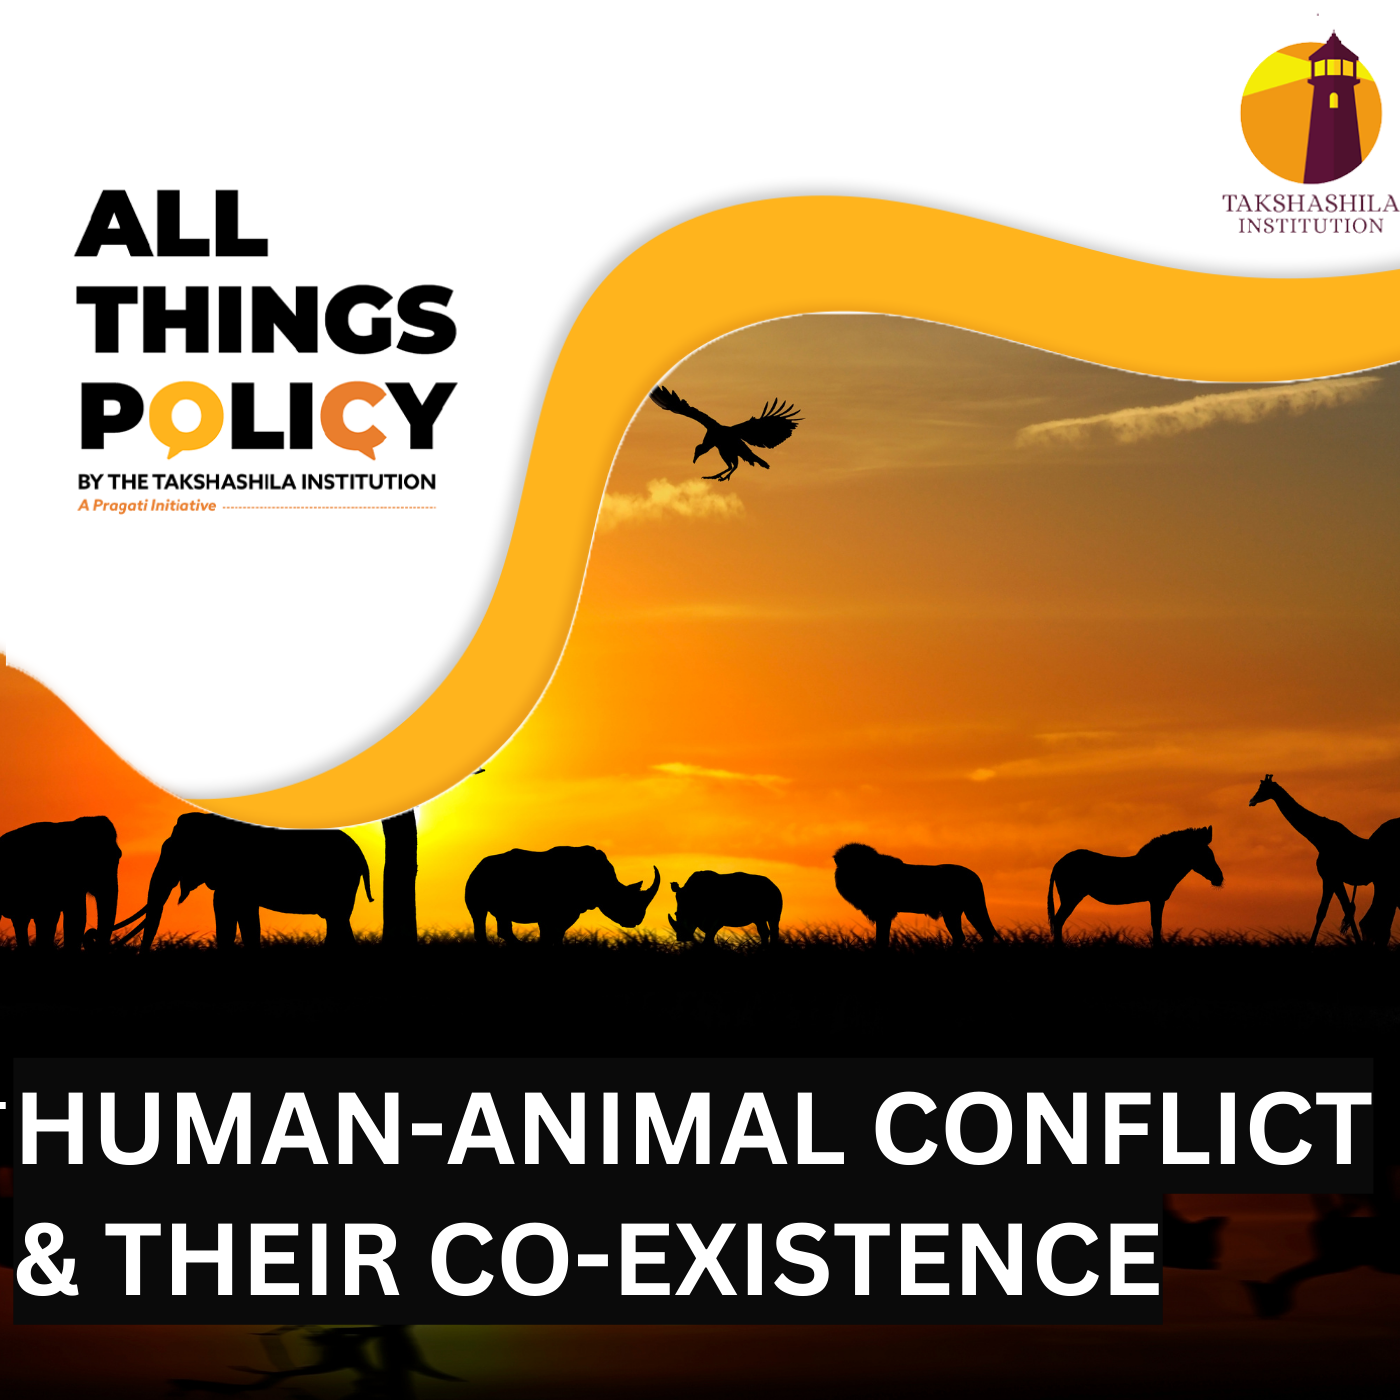 Human-Animal conflict & their co-existence